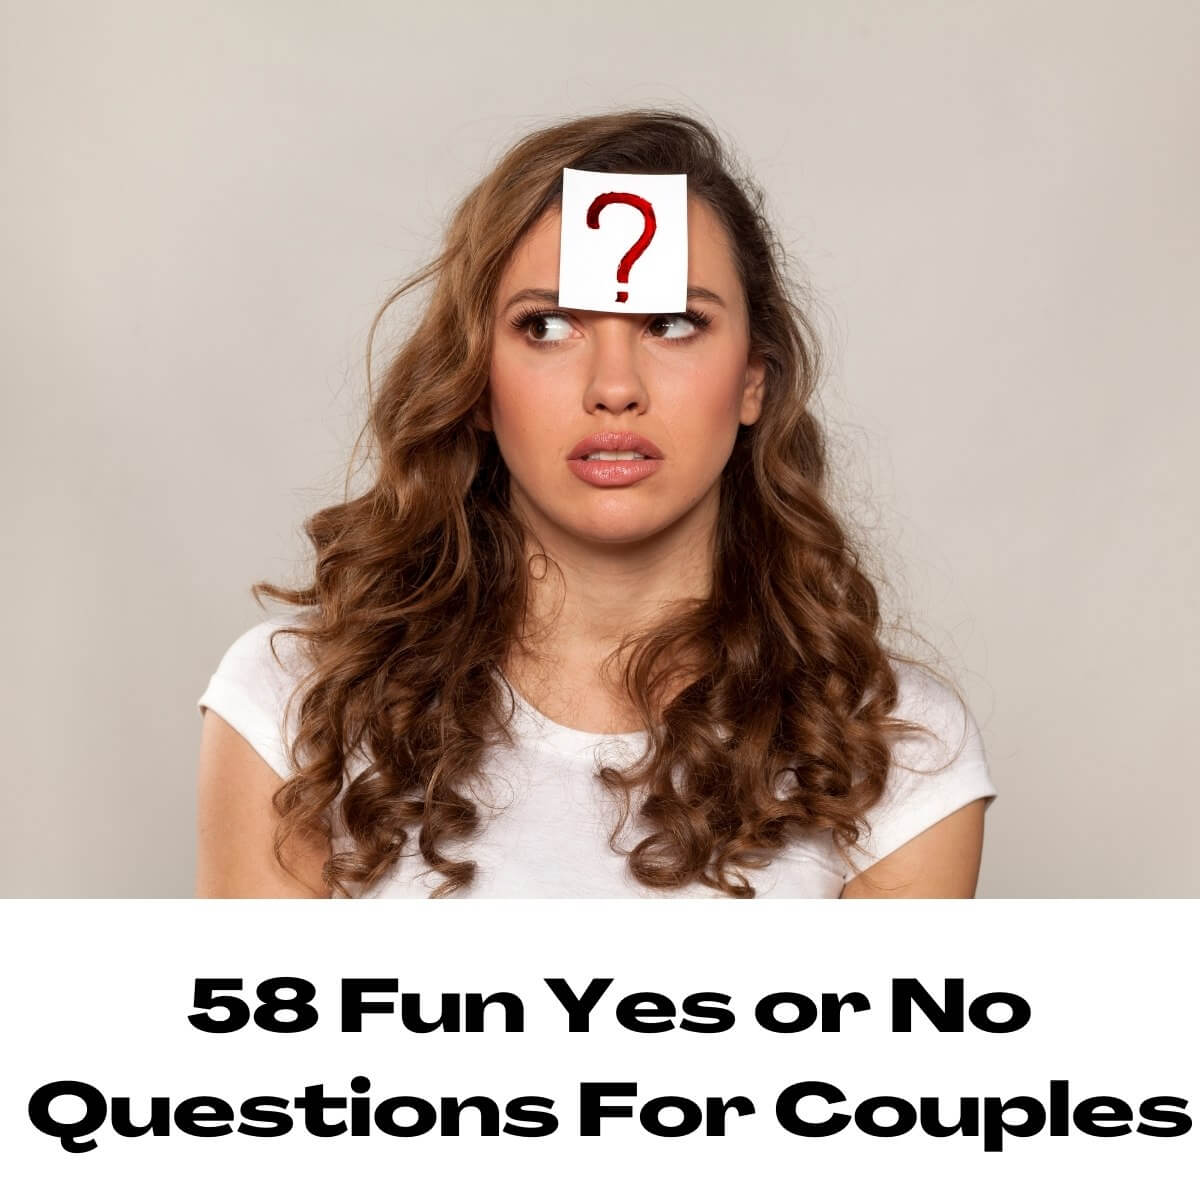 259 Fun Yes or No Questions for Couples - The Narcissistic Life